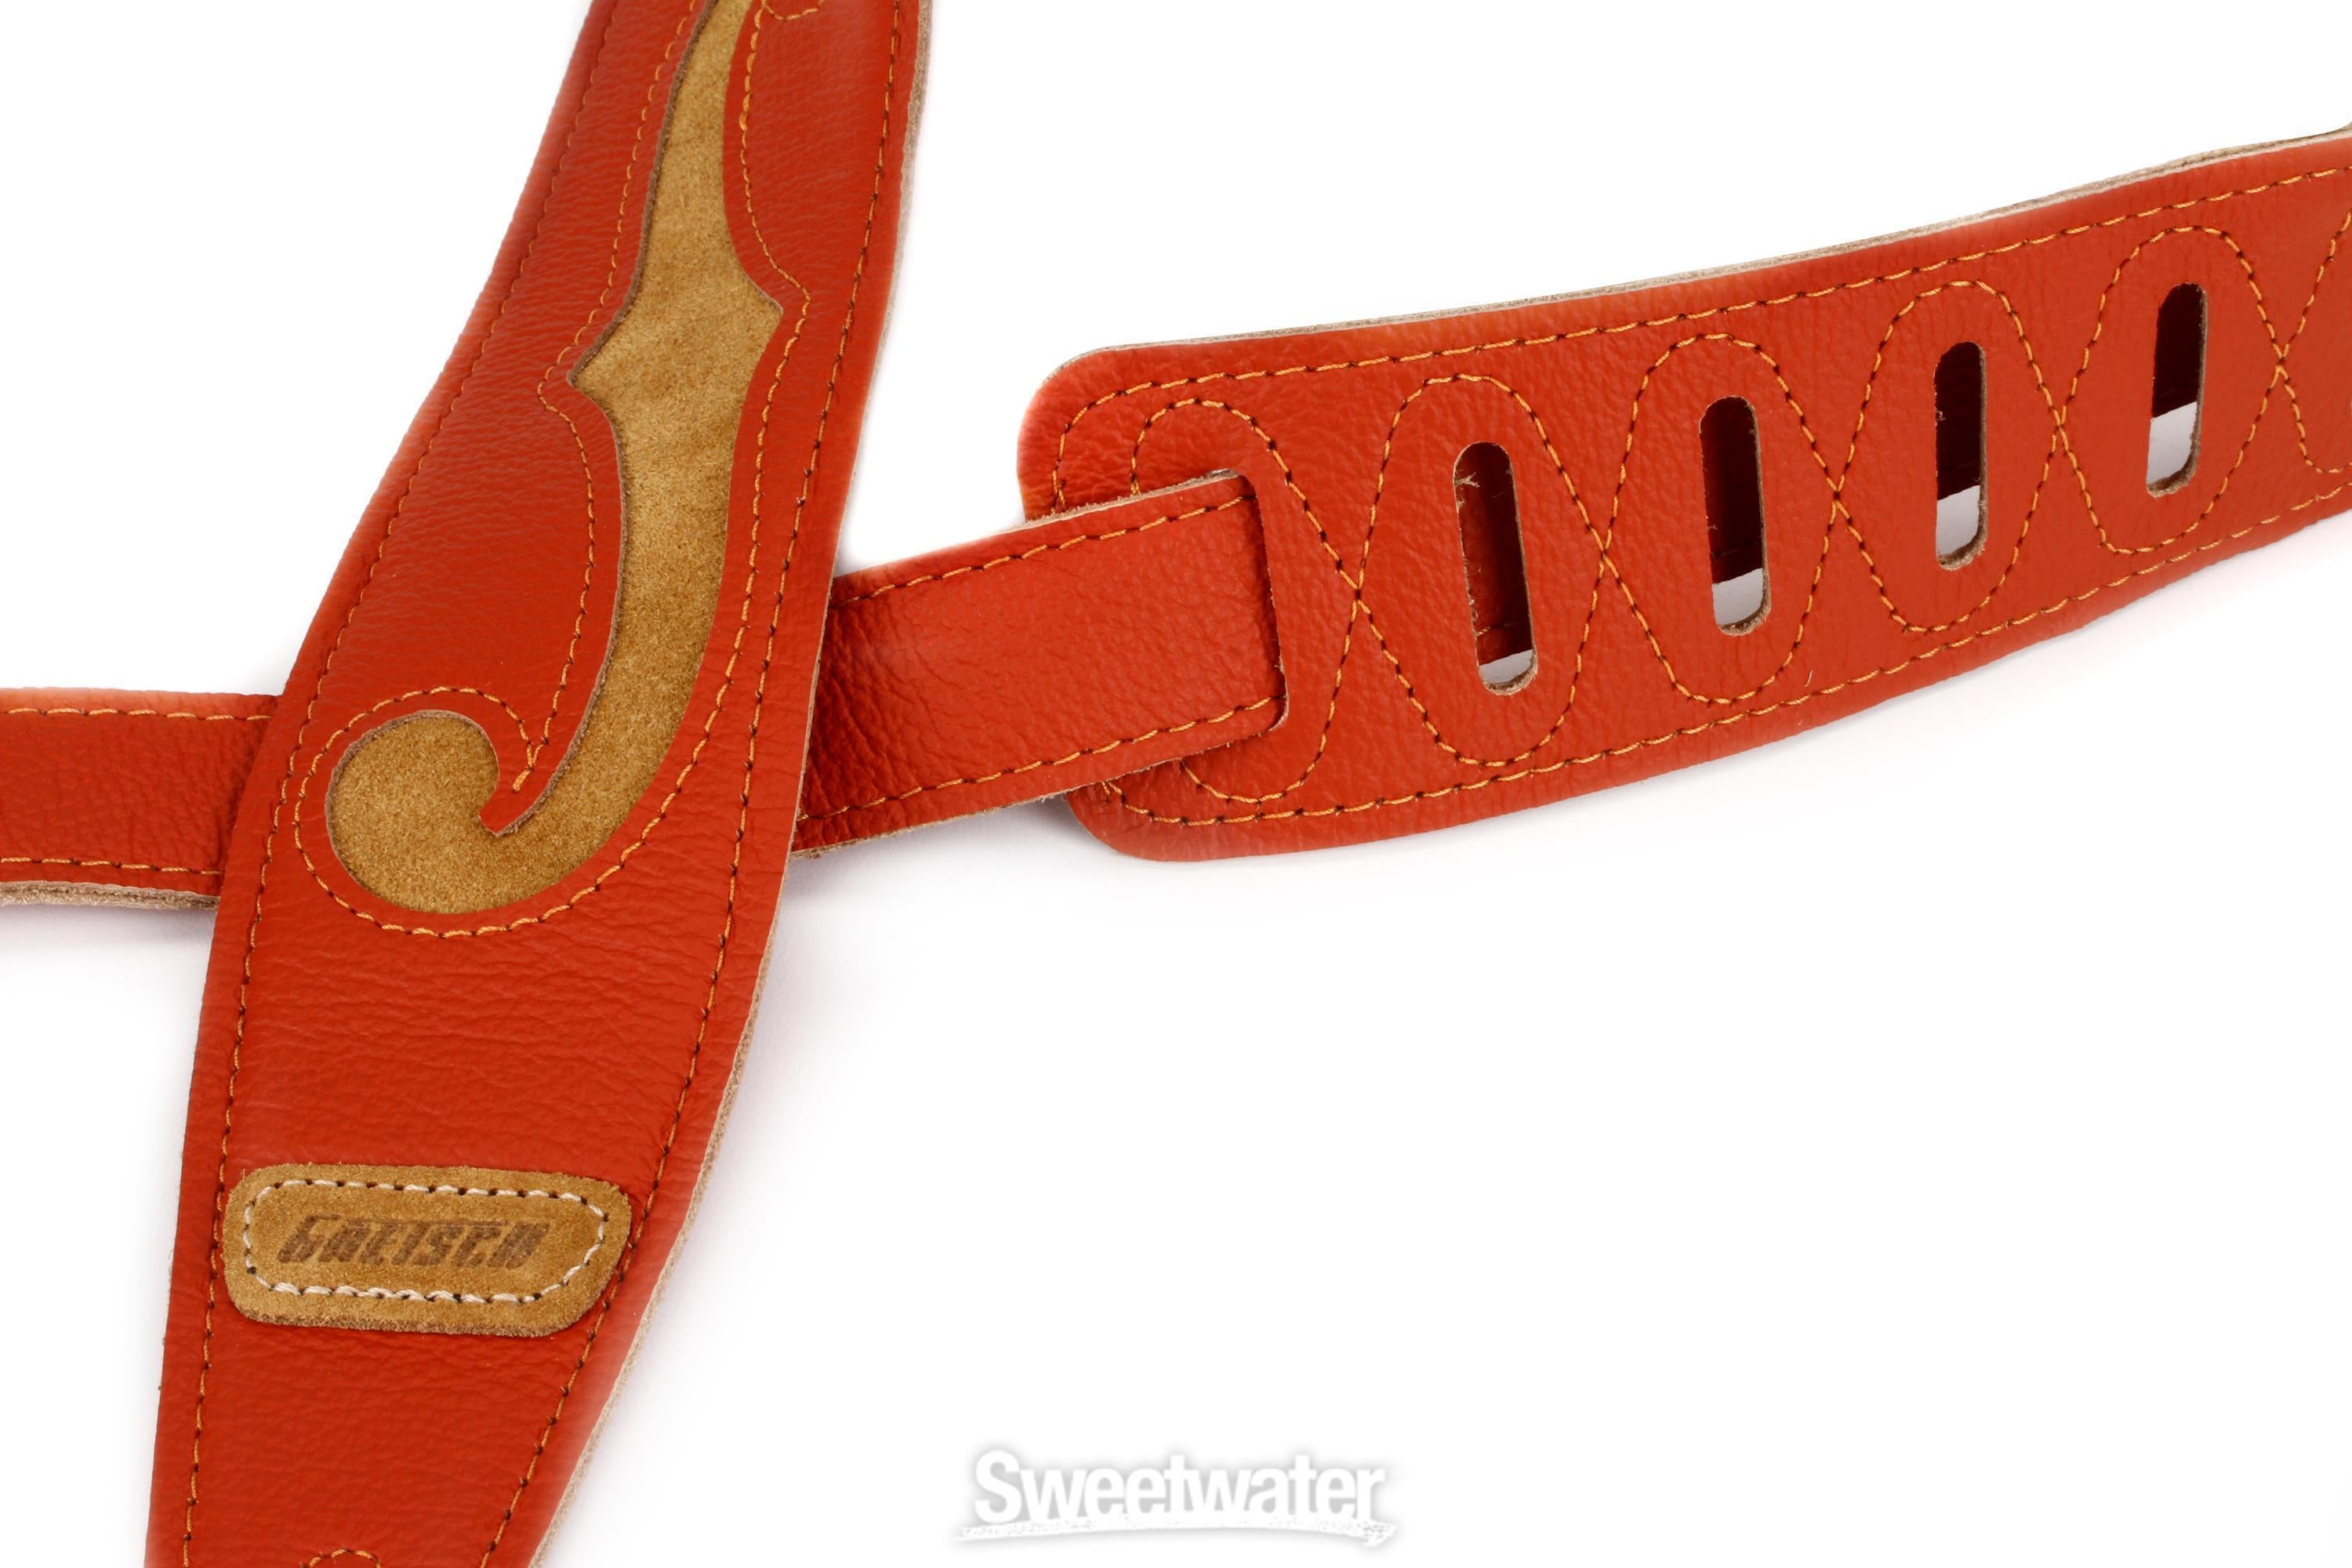 Gretsch F-Holes Leather Strap - Orange and Tan | Sweetwater